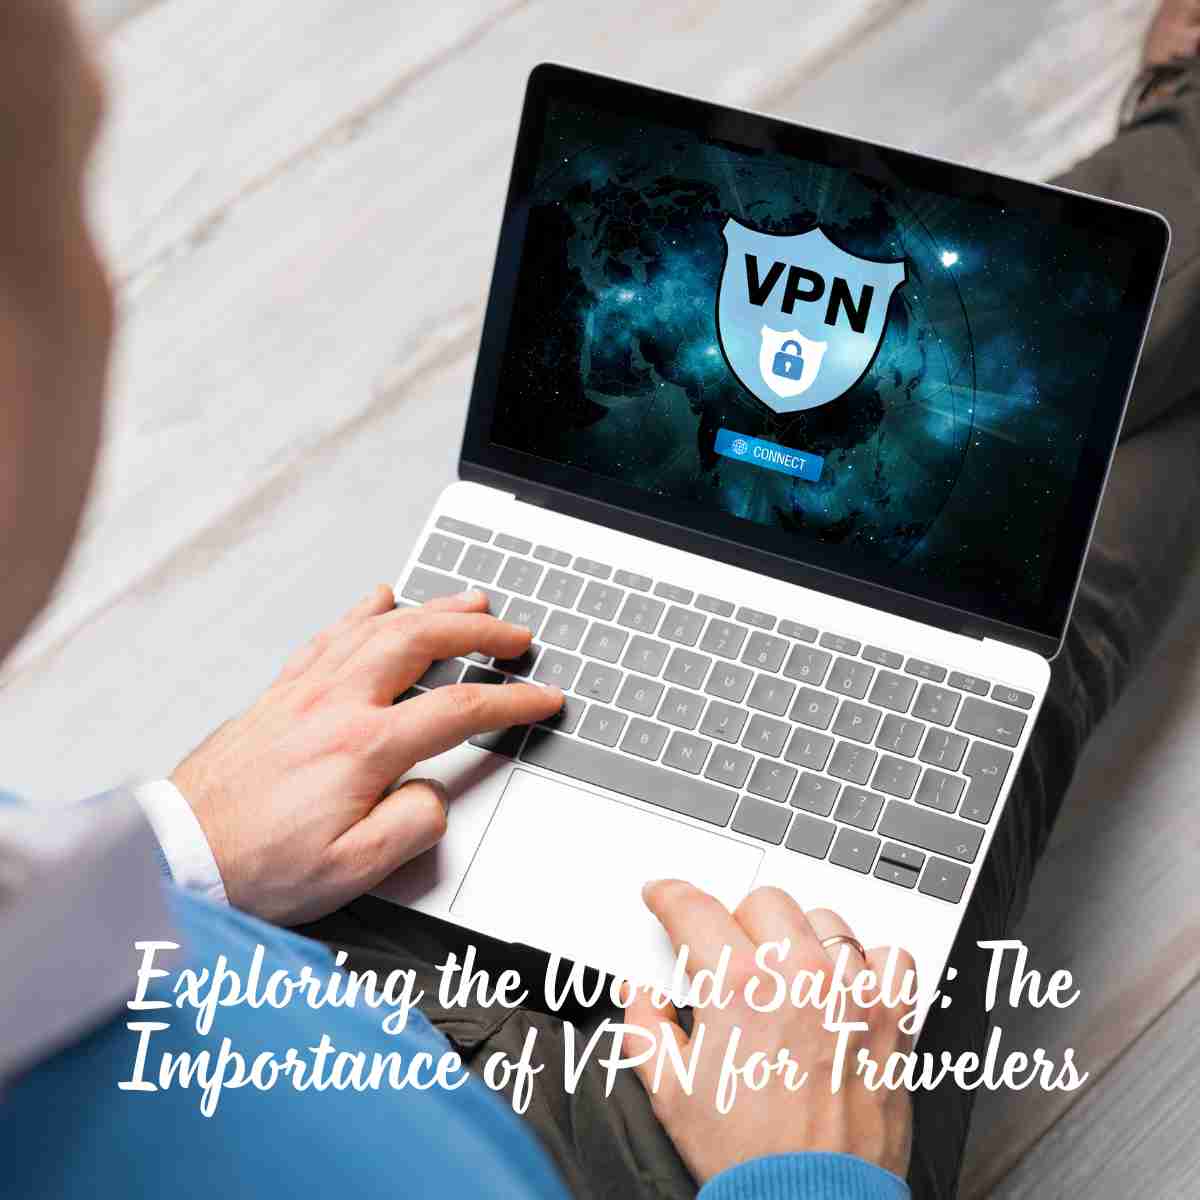 The Importance of VPN for Travelers